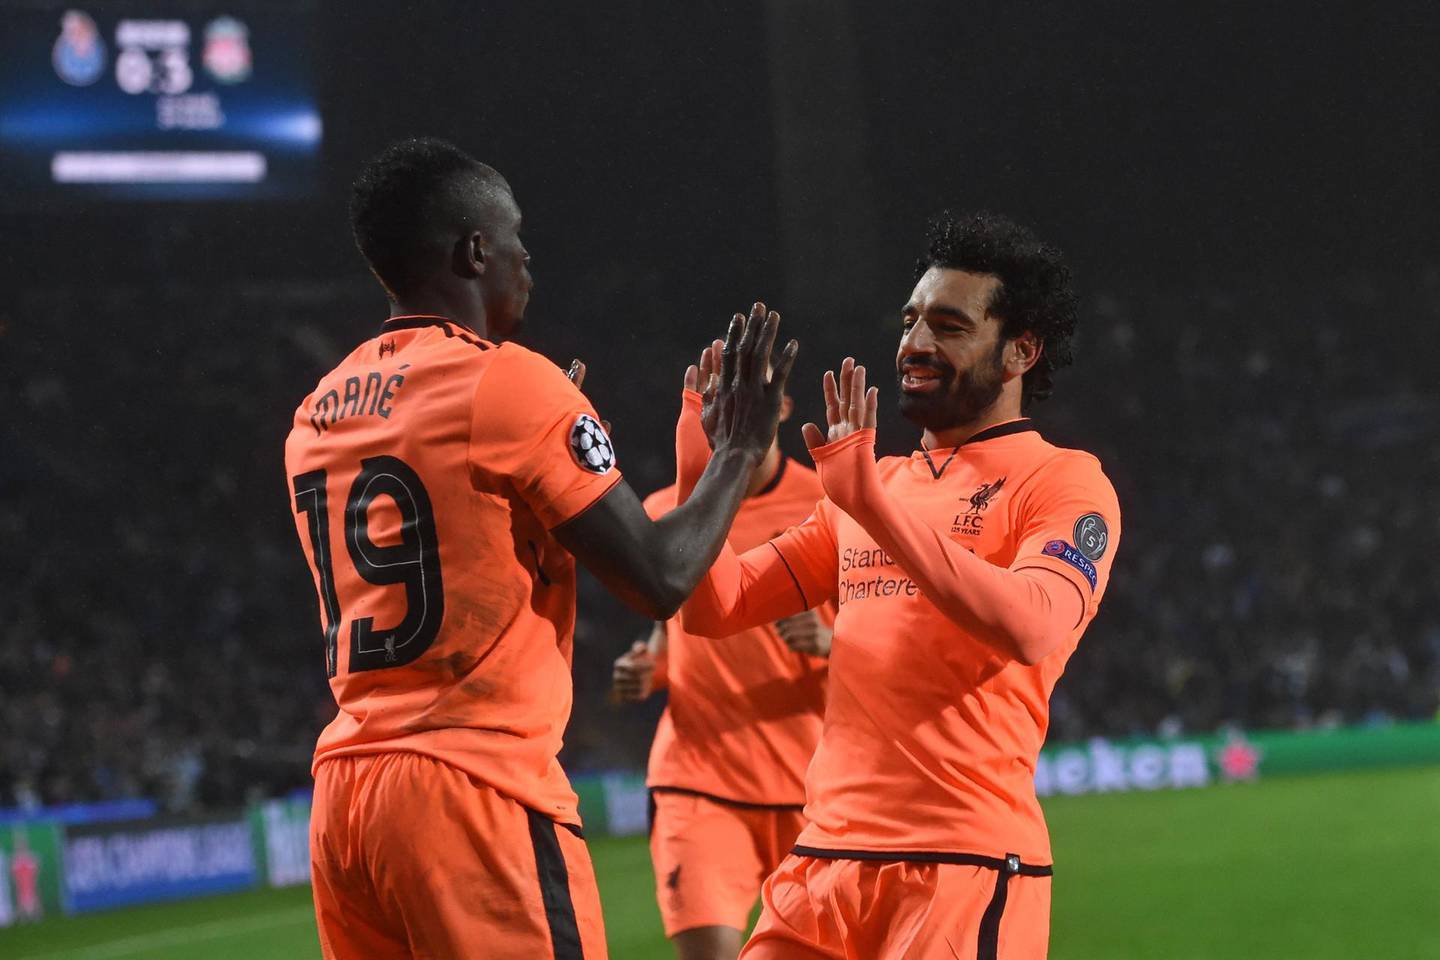 Liverpool's Senegalese midfielder Sadio Mane (L) celebrates with Liverpool's Egyptian midfielder Mohamed Salah after scoring their third goal during the UEFA Champions League round of sixteen first leg football match between FC Porto and Liverpool at the Dragao stadium in Porto, Portugal on February 14, 2018.
Liverpool won the game 5-0. / AFP PHOTO / Francisco LEONG